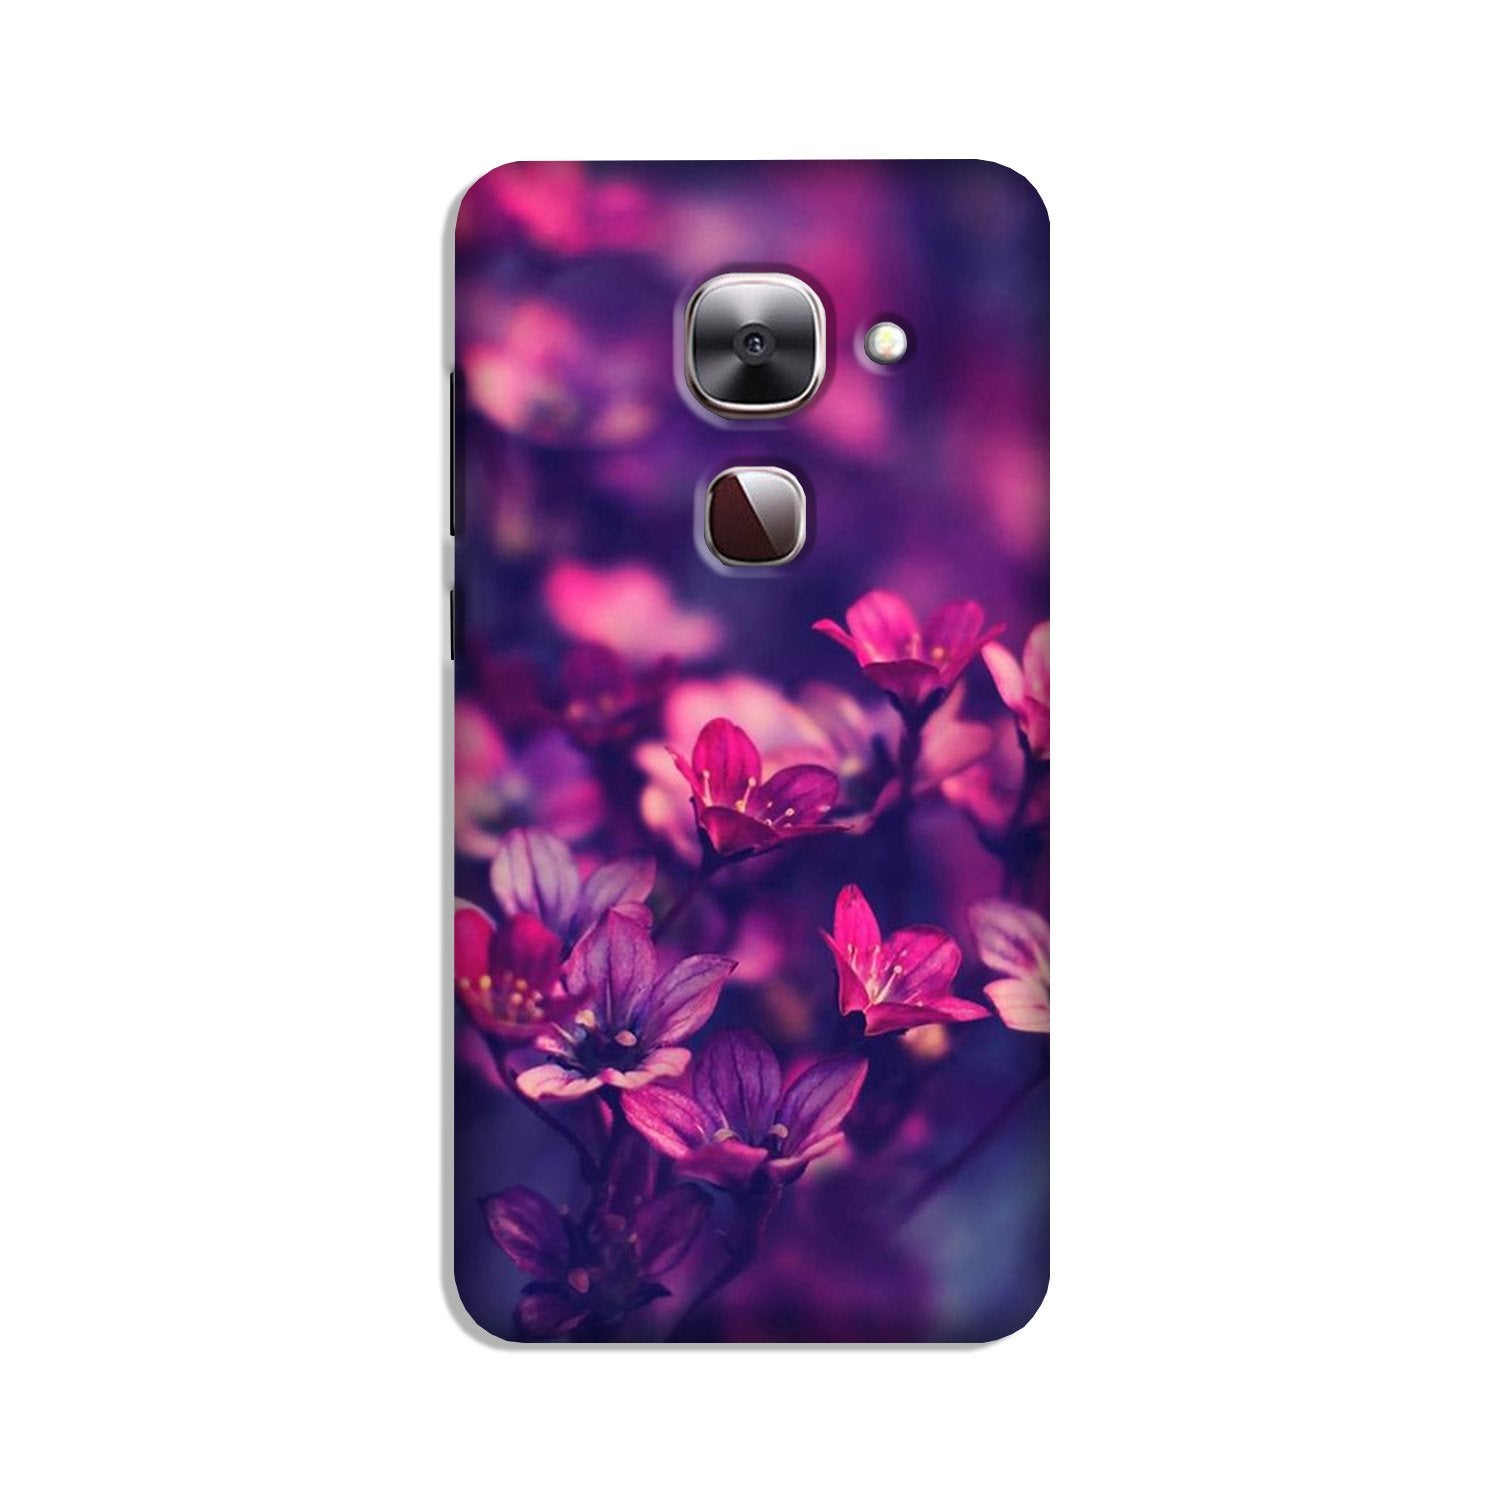 flowers Case for LeEco le 2s